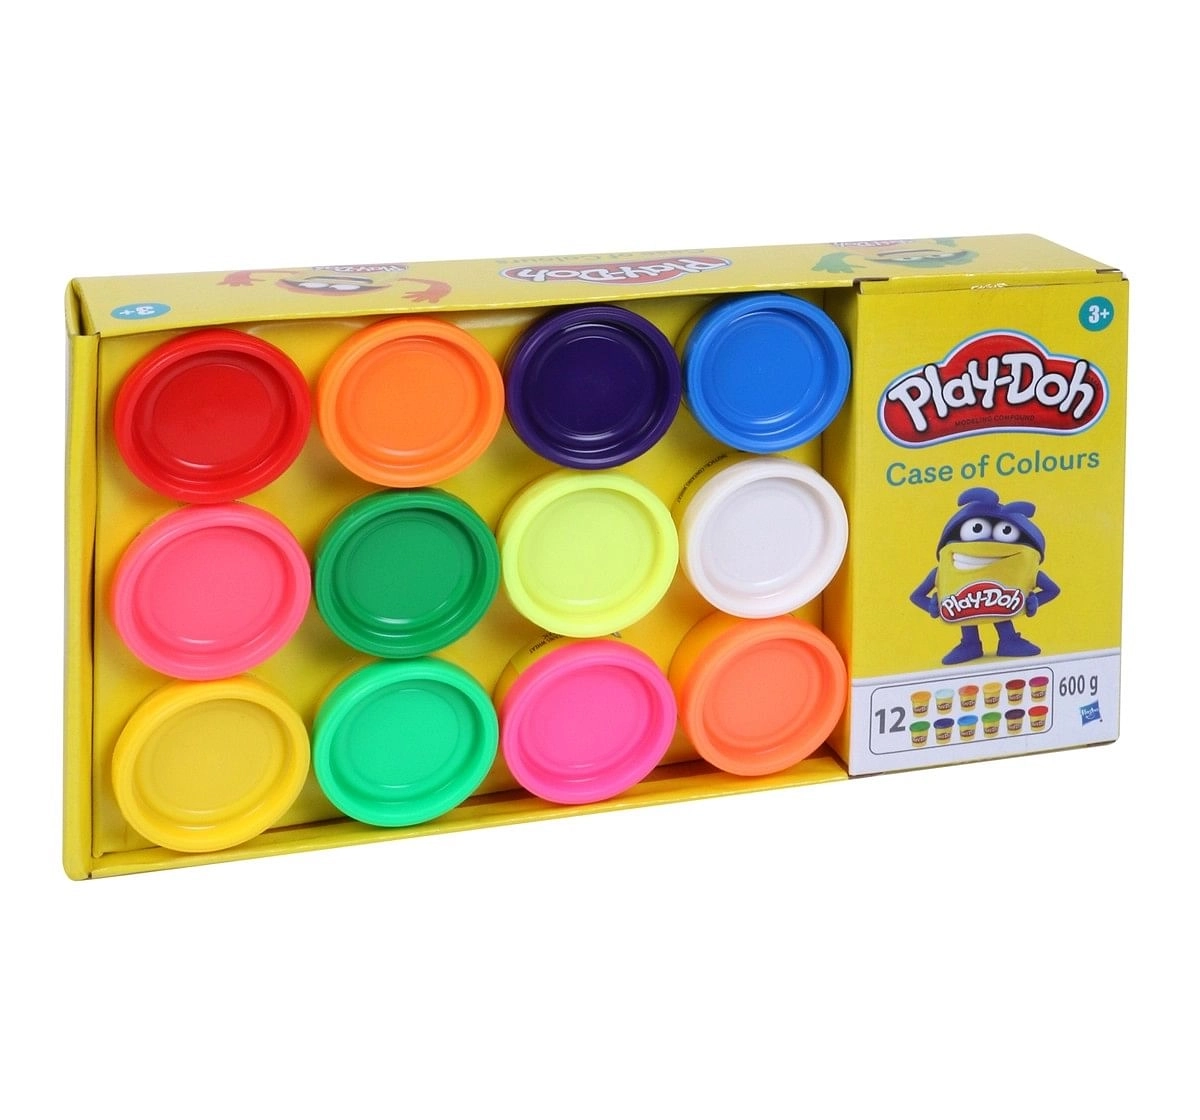 Play Doh Case of Colours 12 Pack of 2 Ounce Cans for Kids Multicolor 2Y+